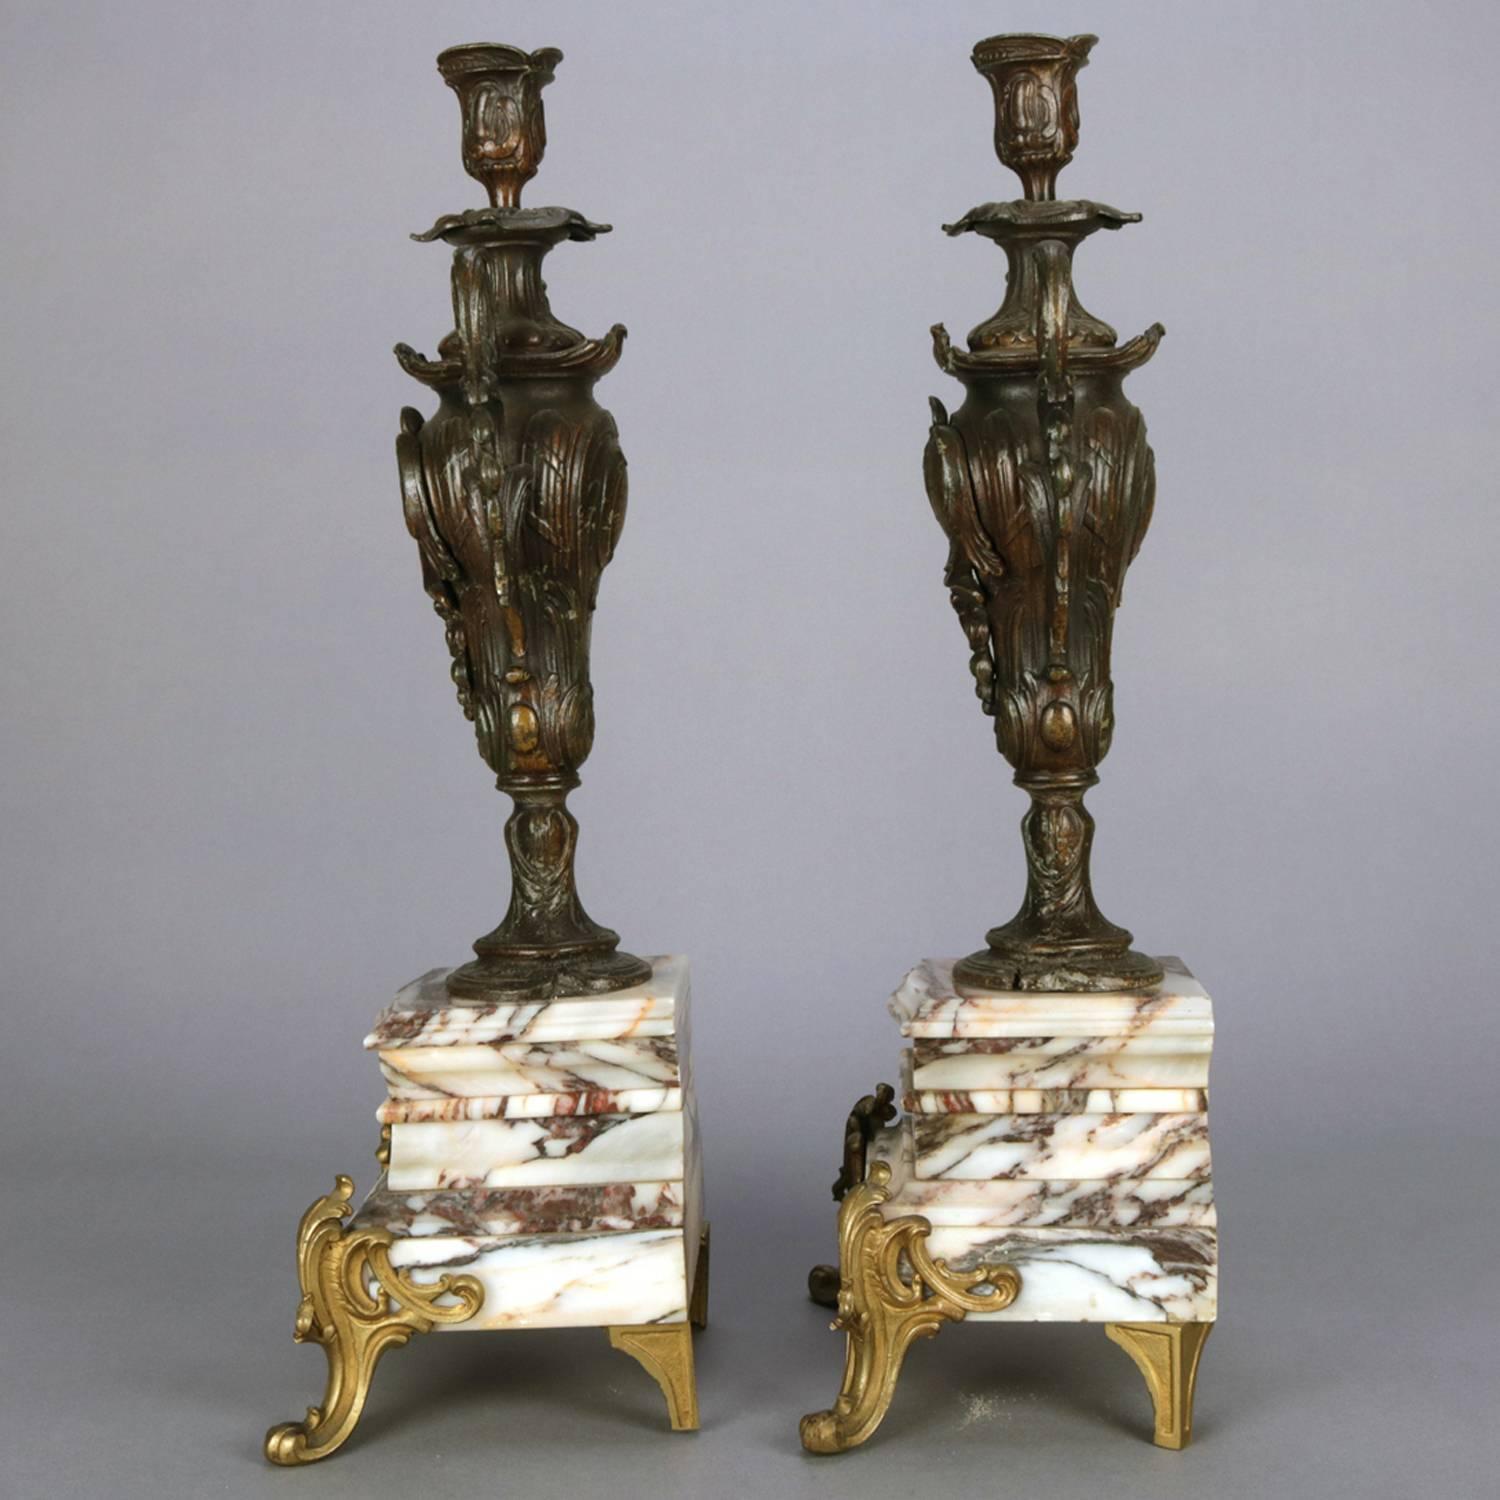 Pair of Classical Parcel-Gilt and Bronzed Urn Form Candlesticks on Marble Base 2